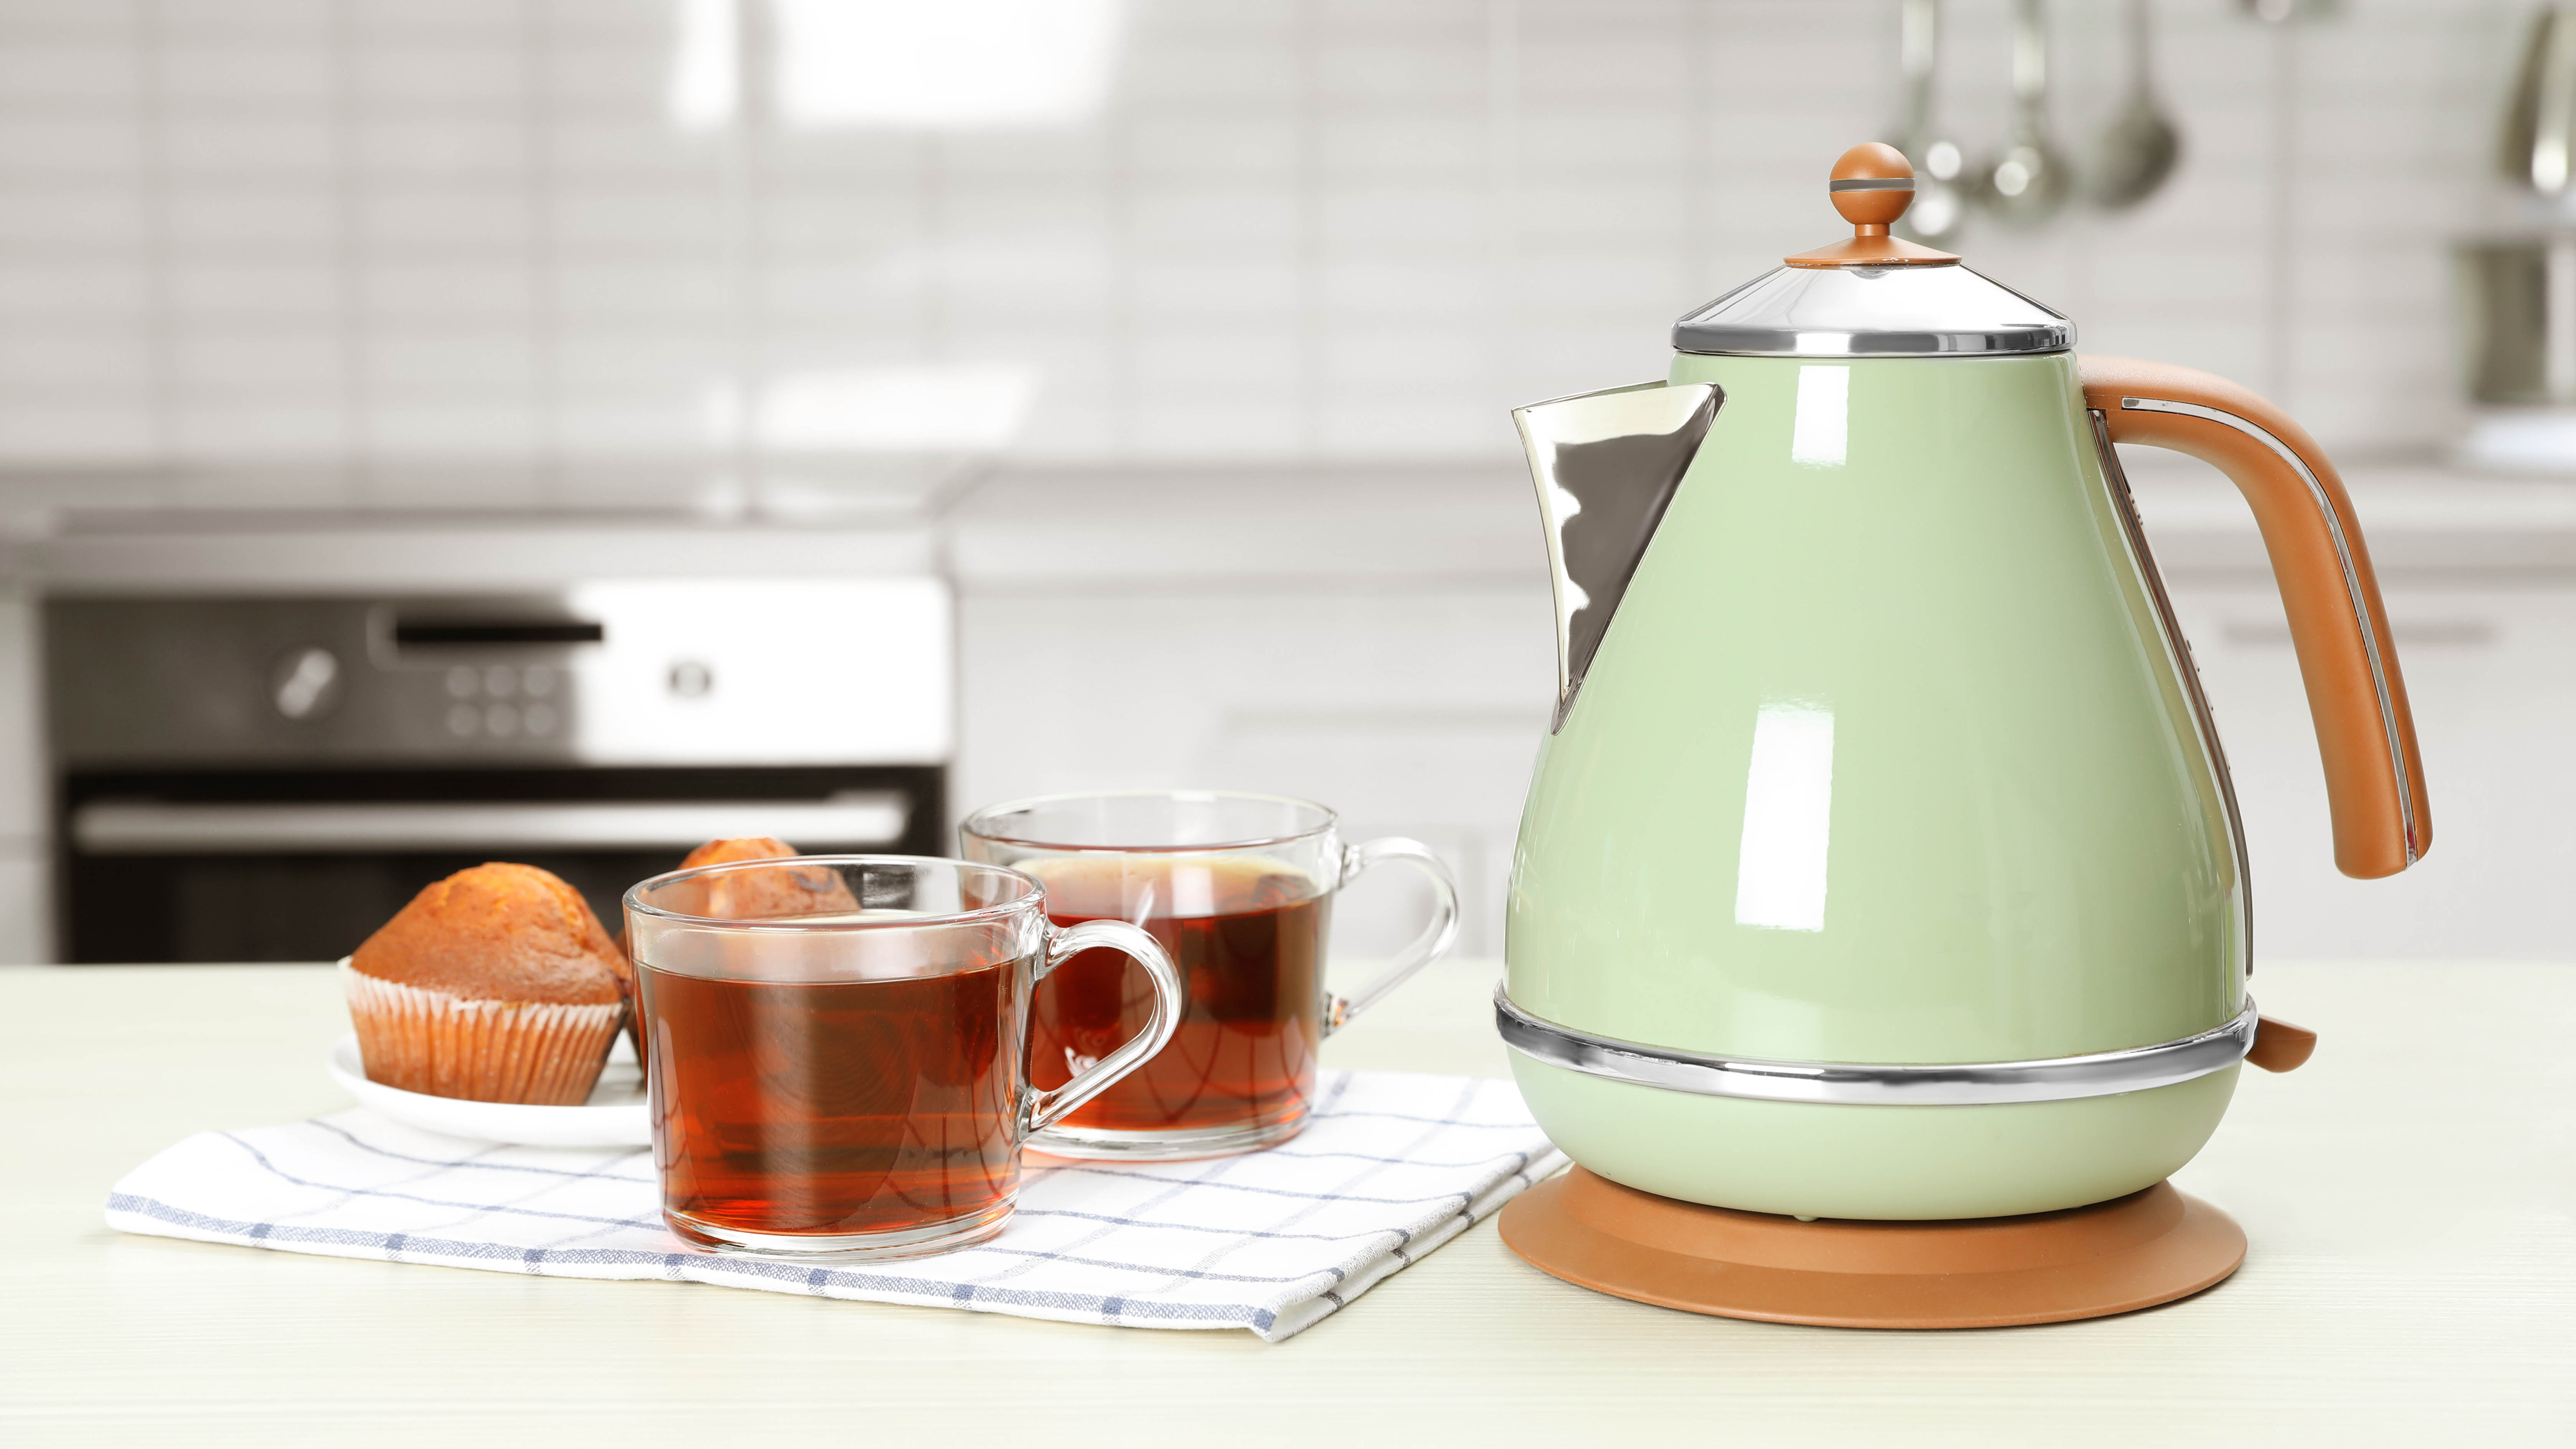 America's Test Kitchen equipment review: stovetop tea kettles